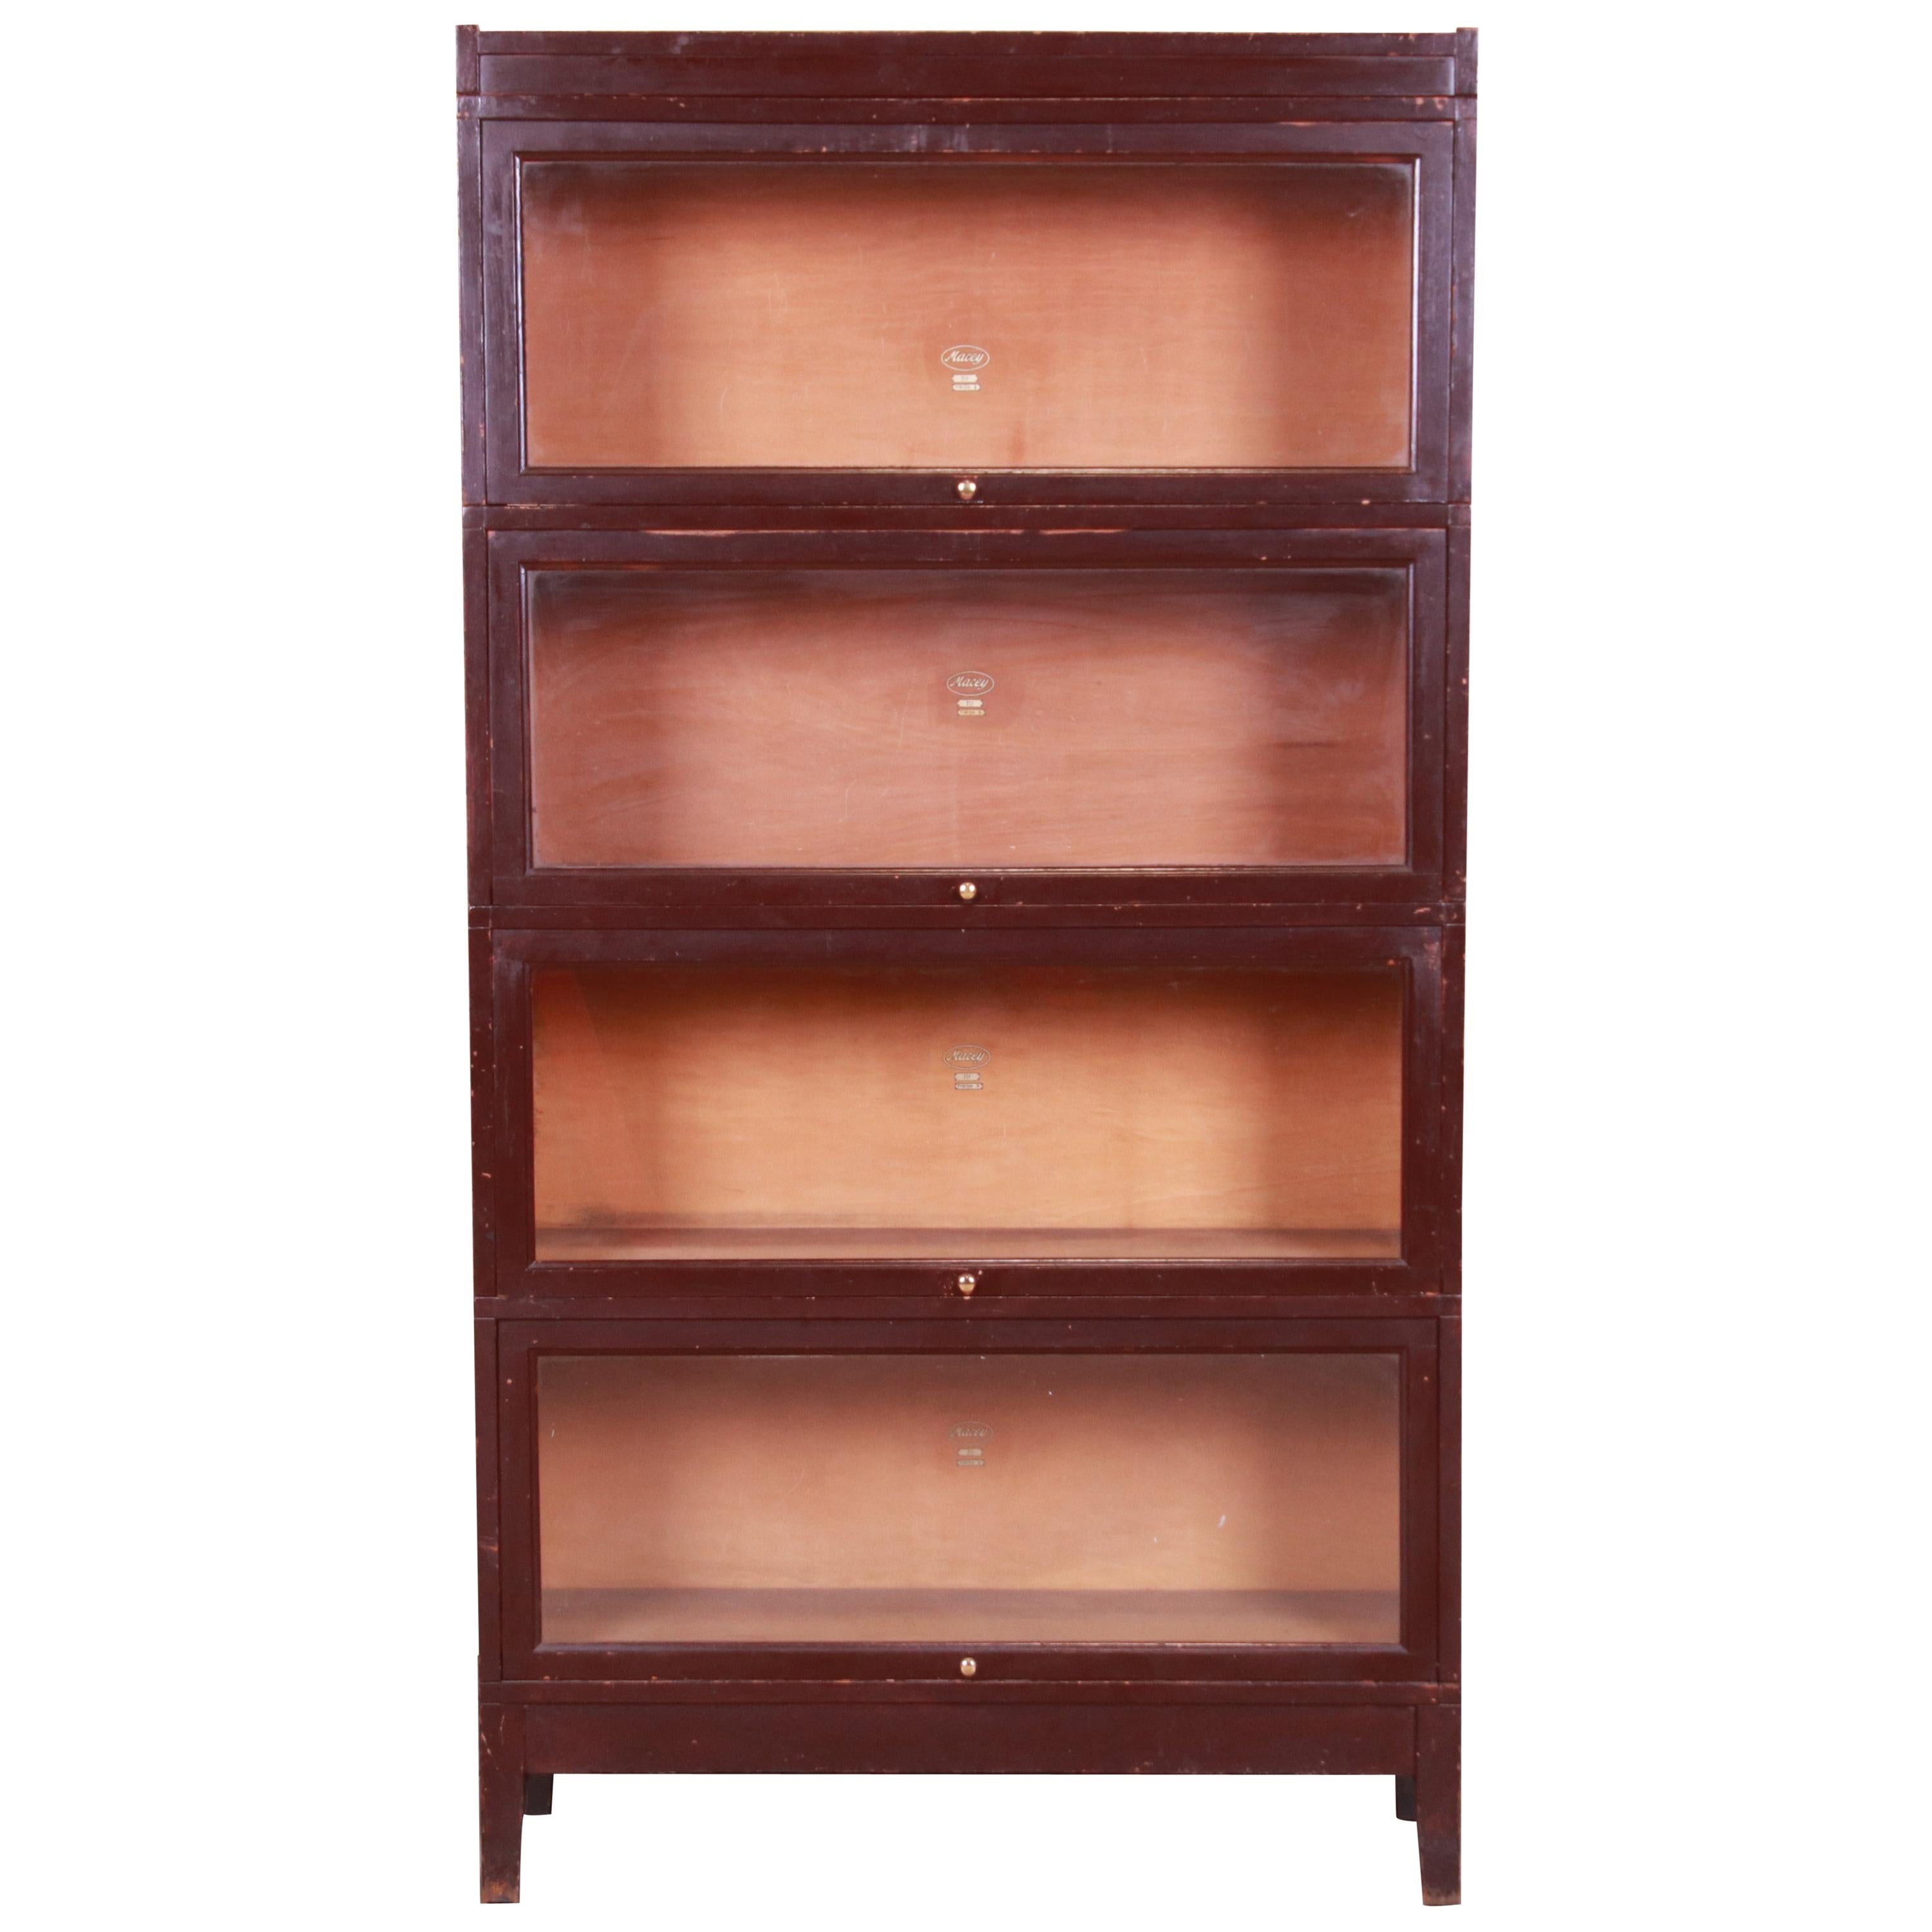 Antique Four-Stack Barrister Bookcase by Macey, Circa 1920s